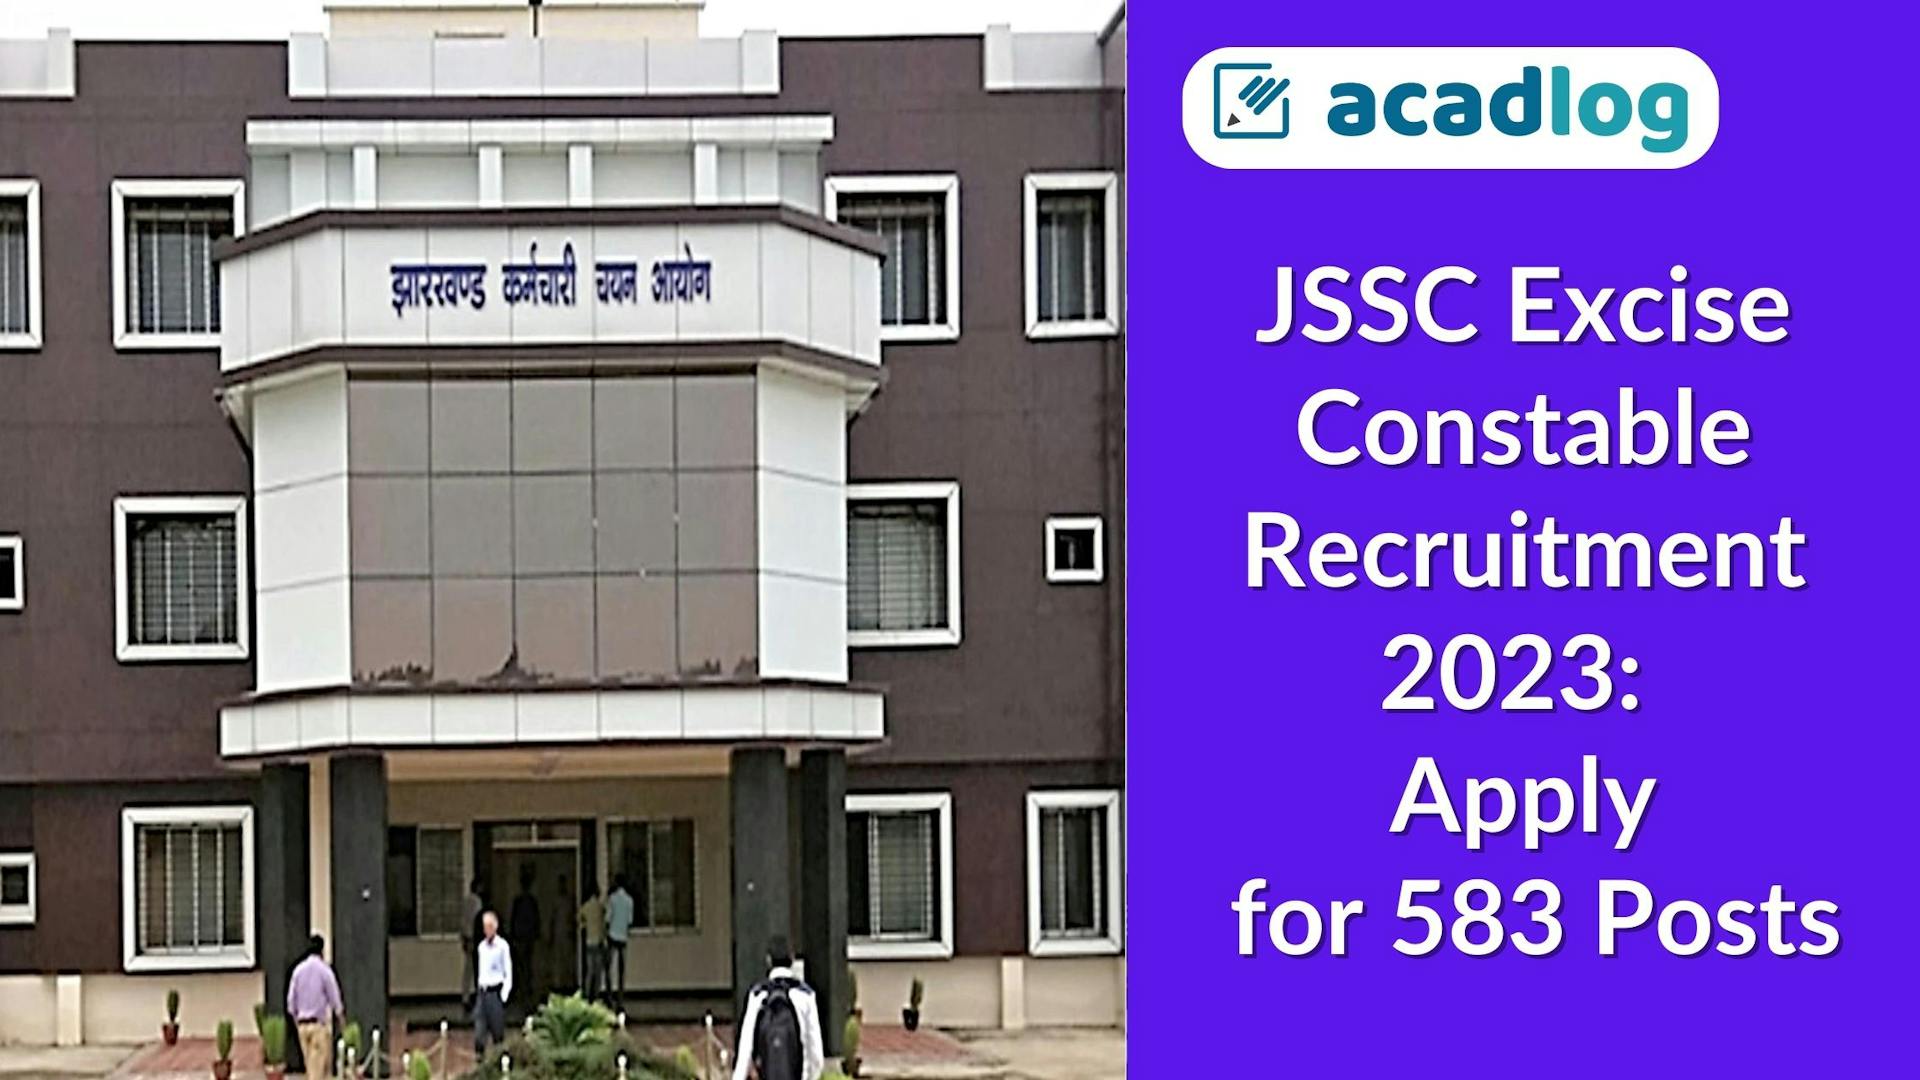 JSSC Excise Constable Recruitment 2023: Apply for 583 Posts